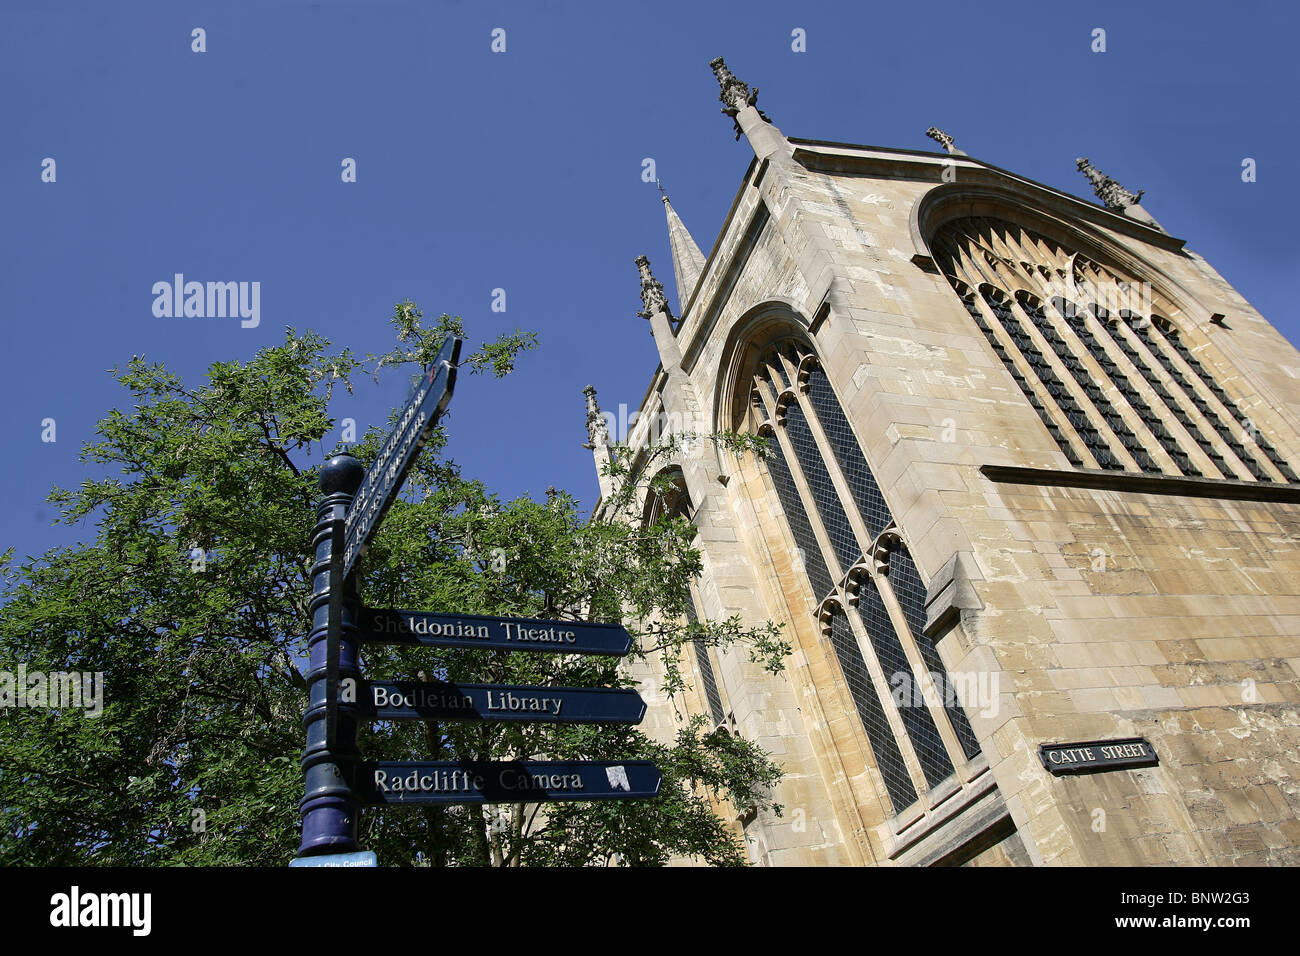 Oxford City scene, finger signpost showing directions to the Sheldonian Theatre, Bodleian Library and the Radcliffe Camera. Stock Photo